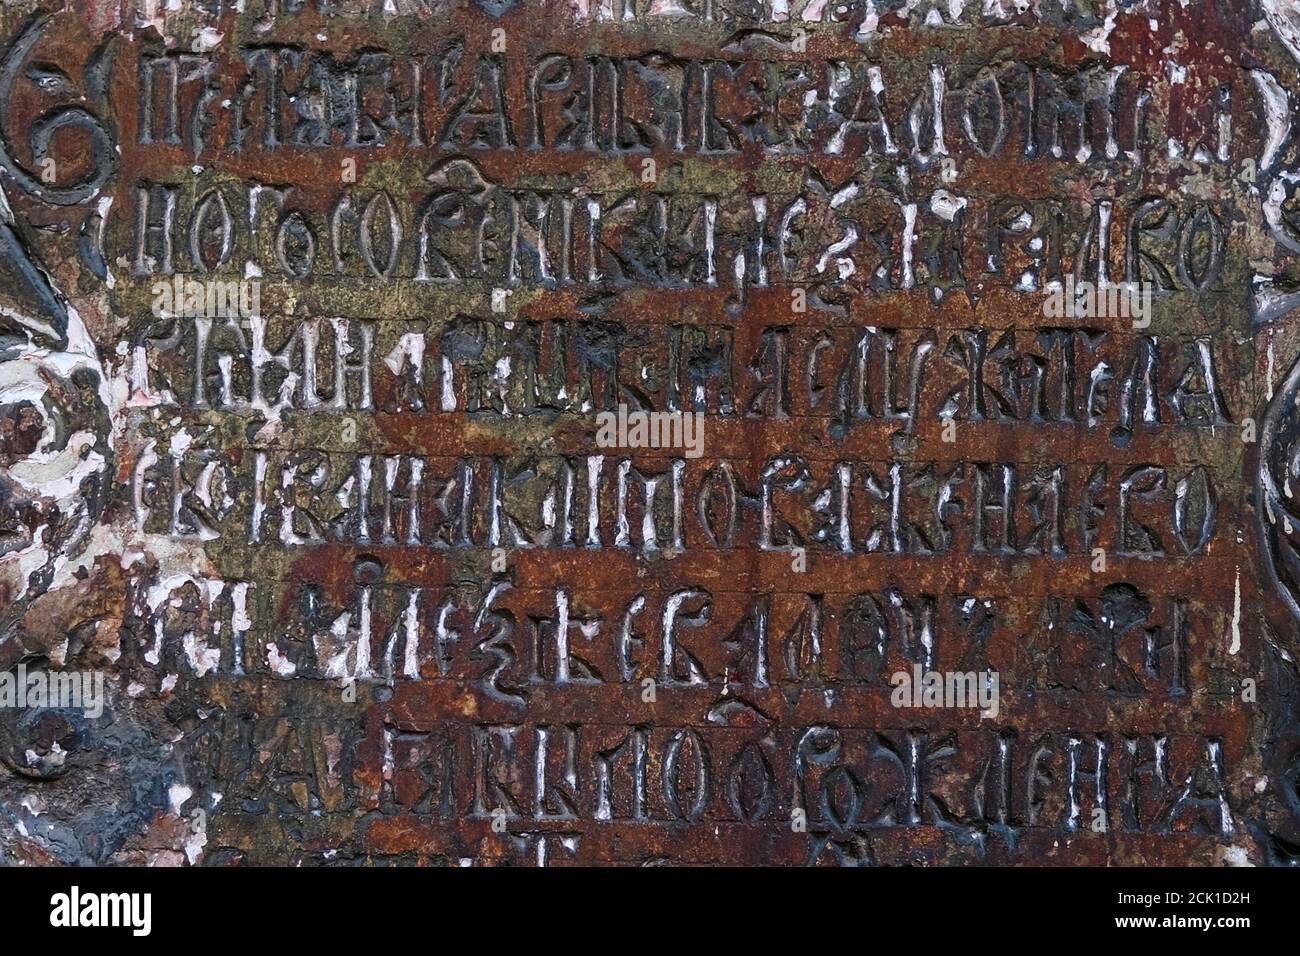 Fragment of Cyrillic Old Slavic letter on weathered stone slab on wall of ancient temple.  Stock Photo